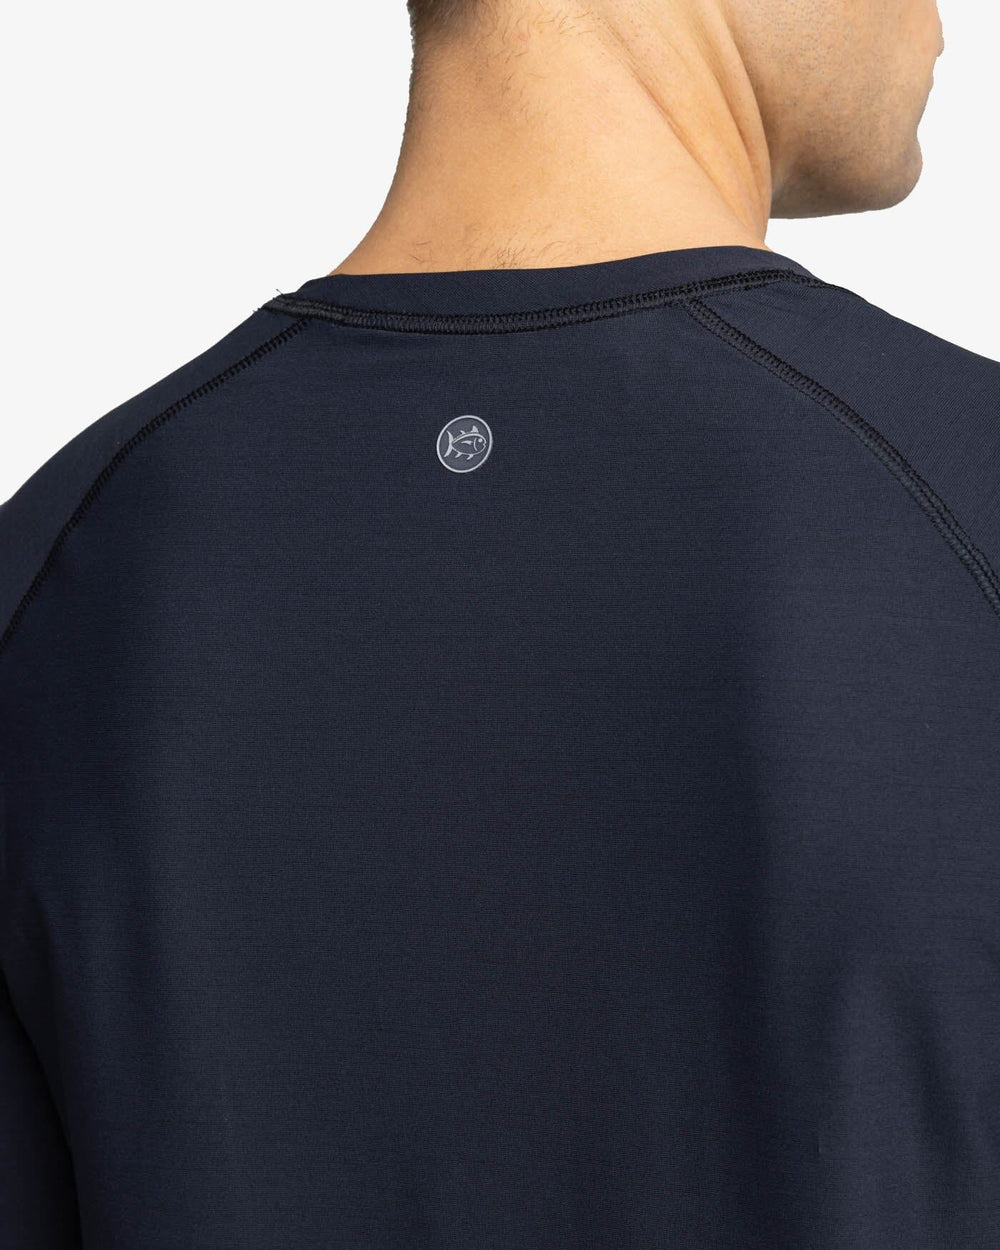 The yoke view of the Southern Tide brrr-illiant Performance Long Sleeve T-Shirt by Southern Tide - Caviar Black